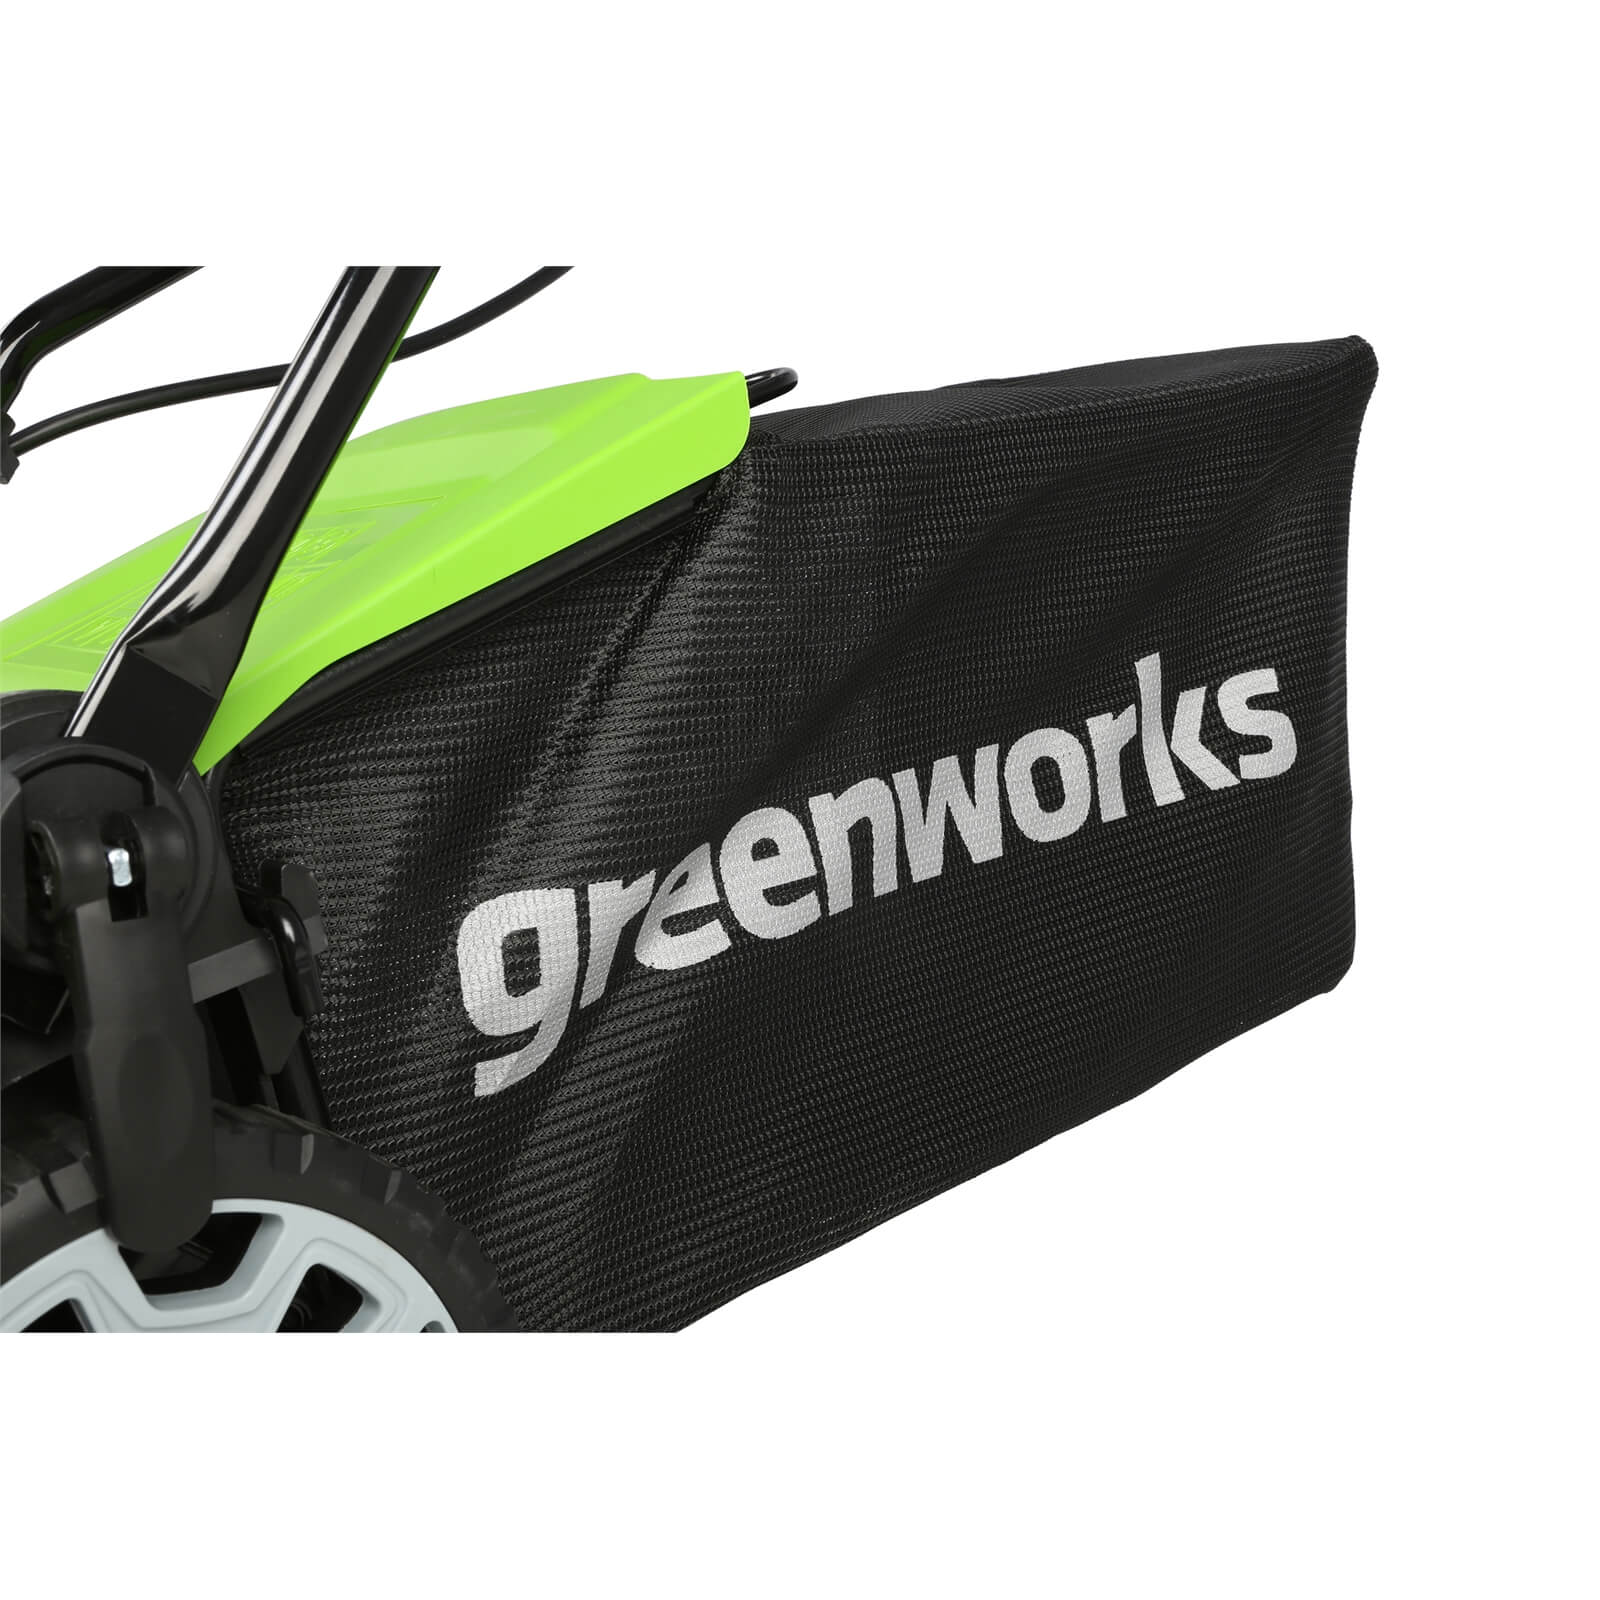 Greenworks 48V Lawnmower 2 Battery Charger (M36K2X)